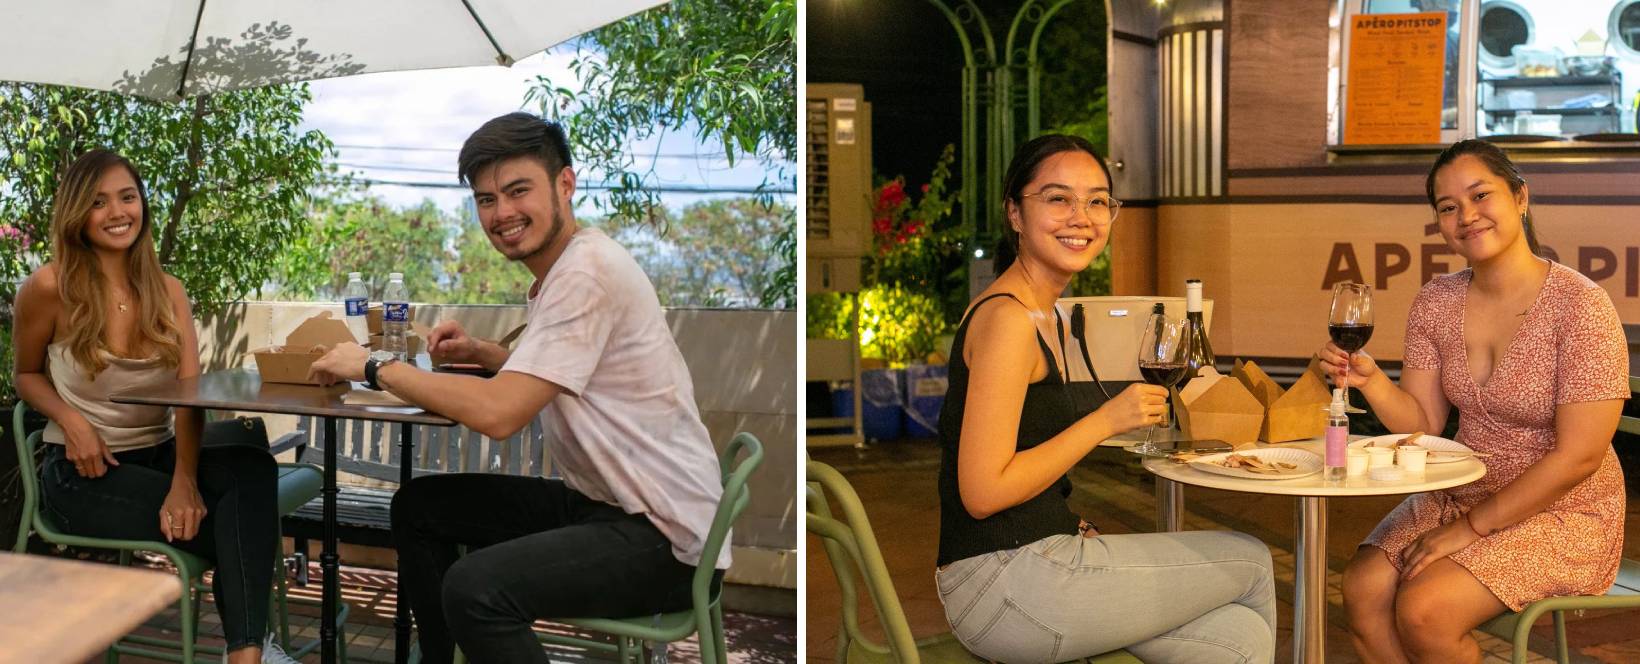 Apero Pitstop in Quezon City - day and night